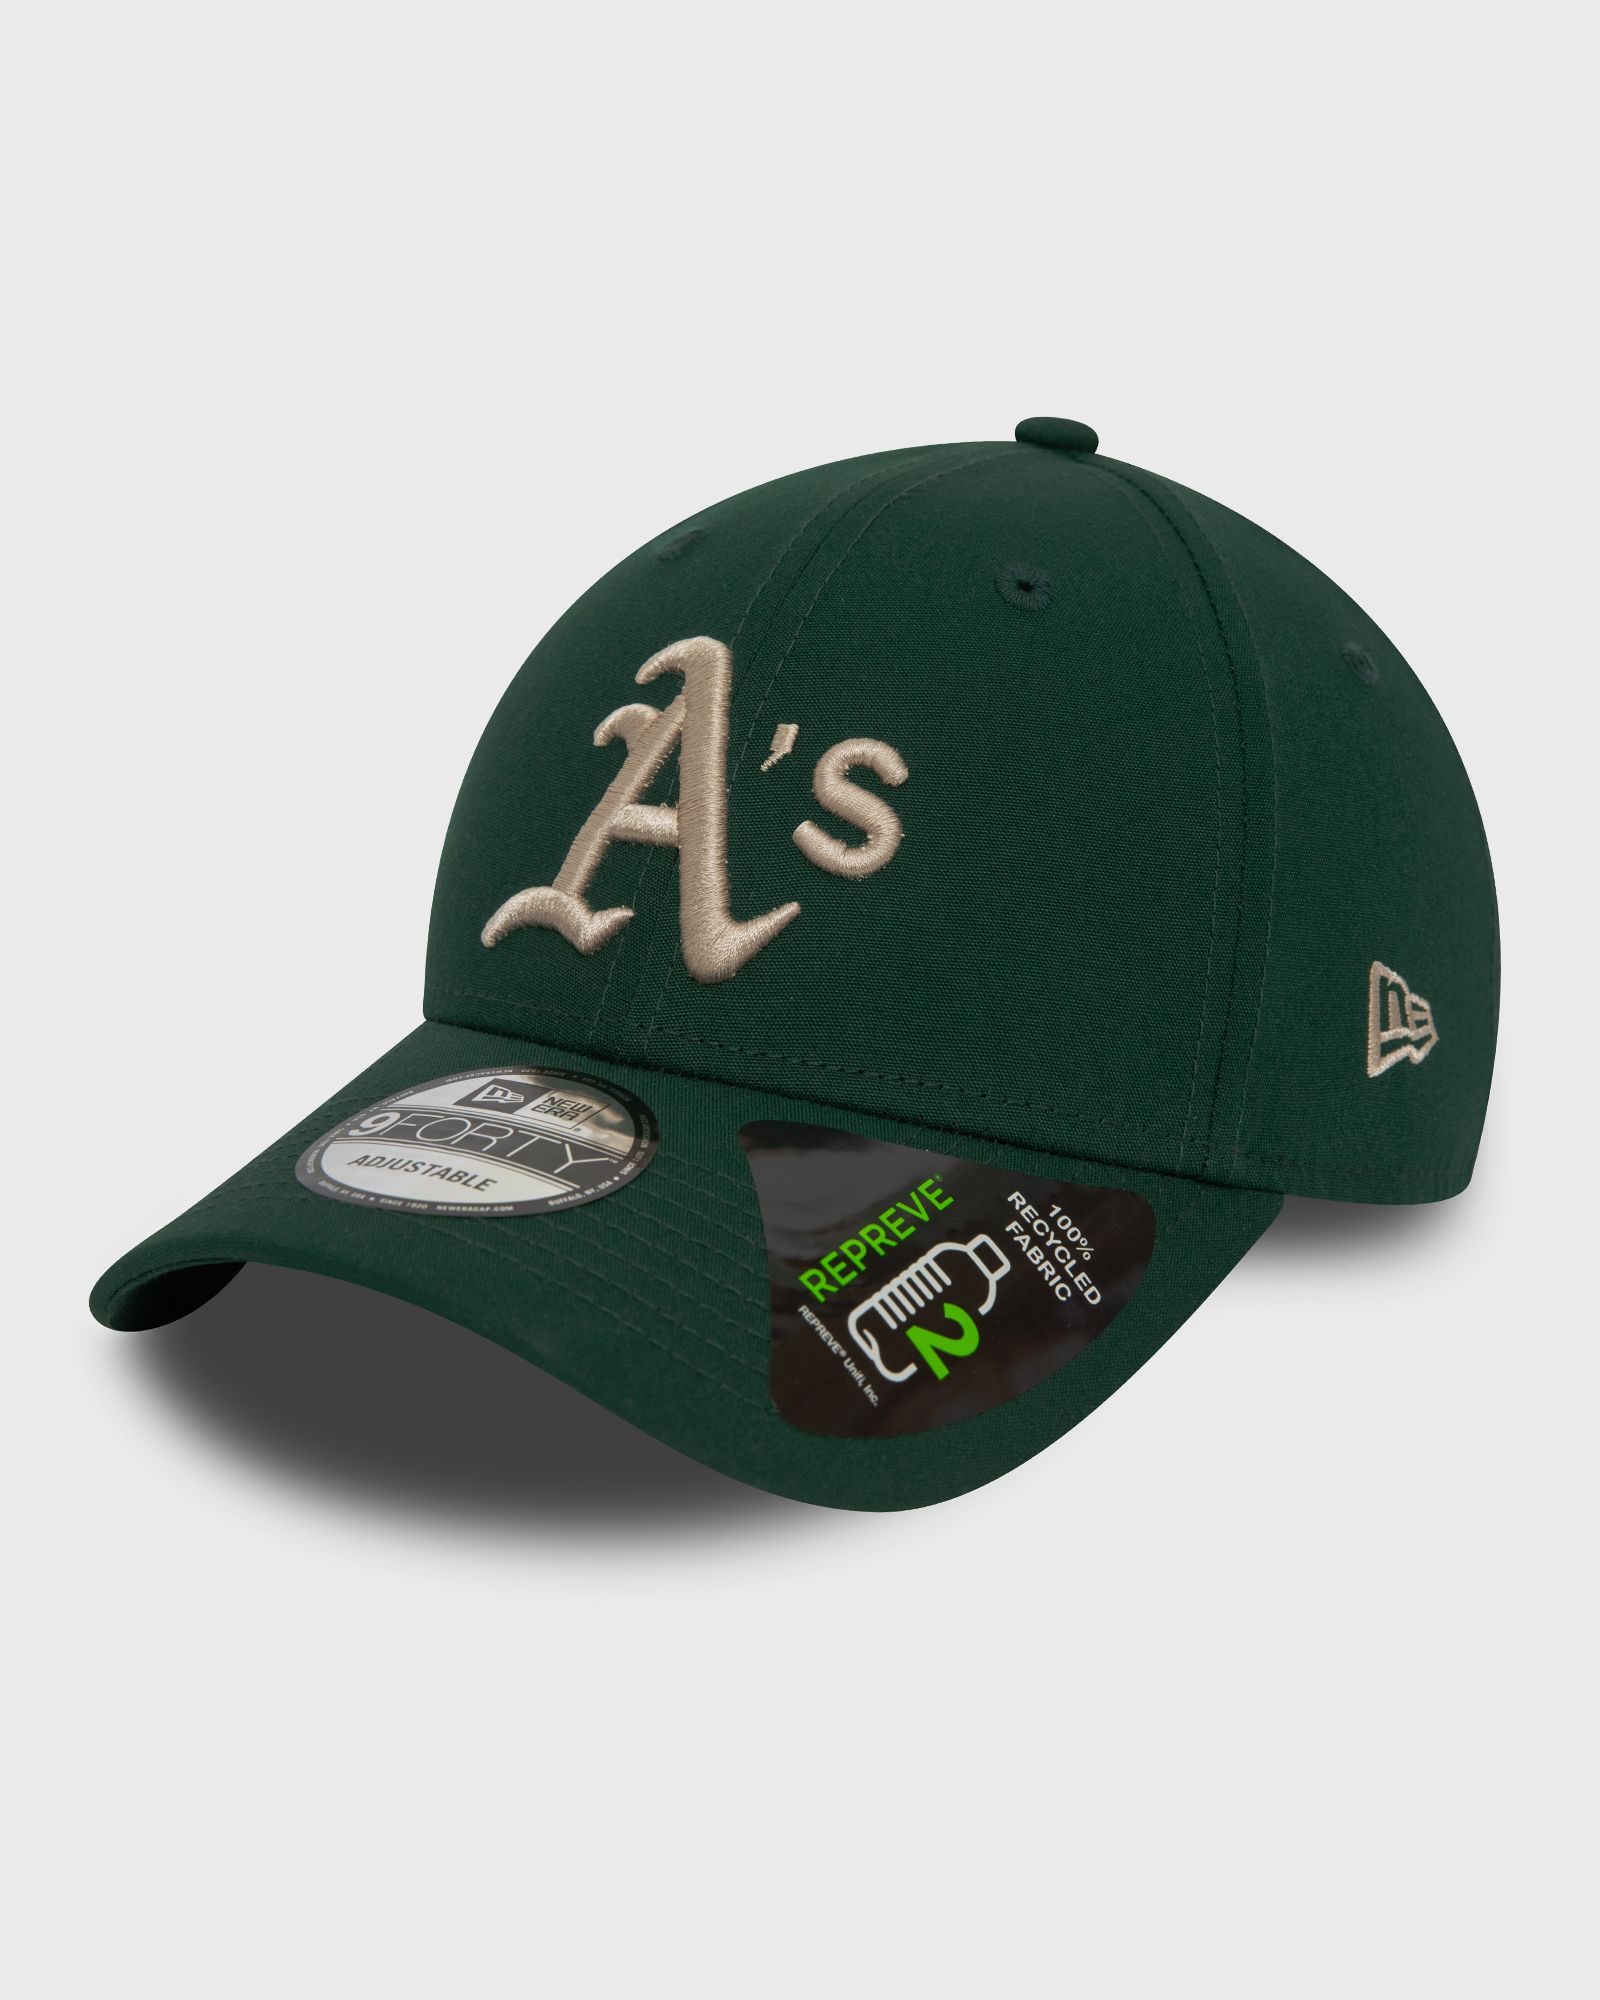 New Era - repreve 9forty oakland athletics men caps green in größe:one size